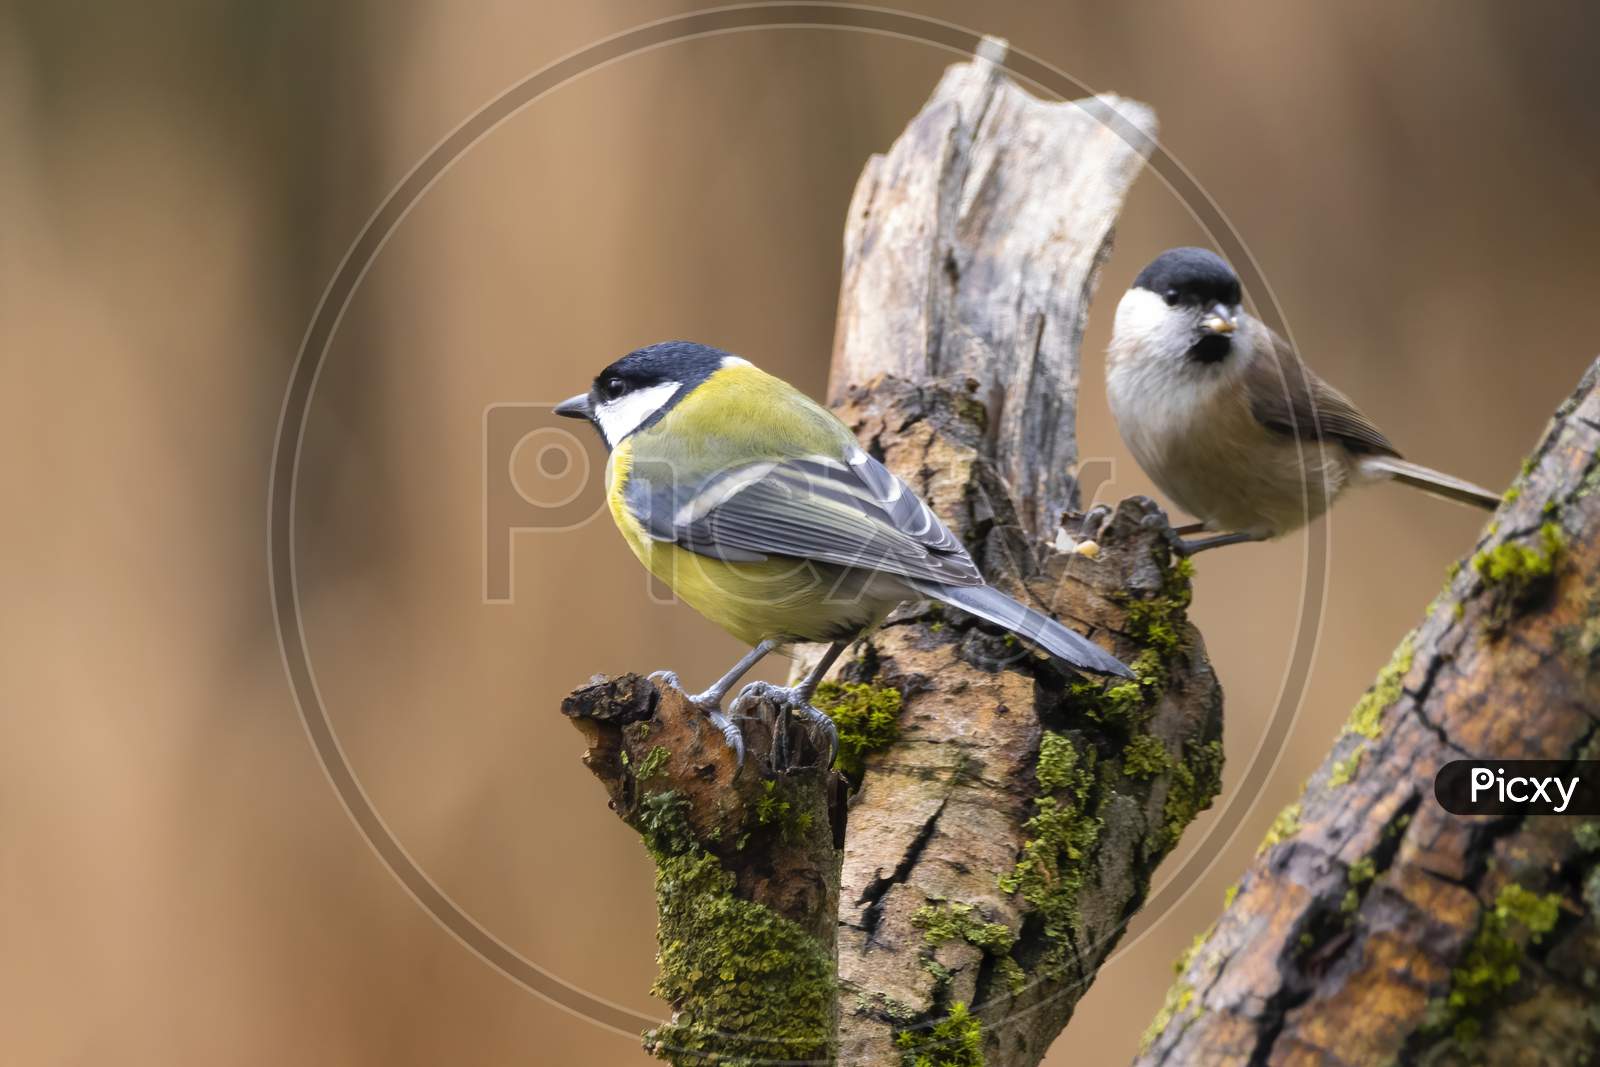 A black tit or also called coal tit at a feeding place at the Mönchbruch pond in a natural reserve in Hesse Germany. Looking for food in winter time.